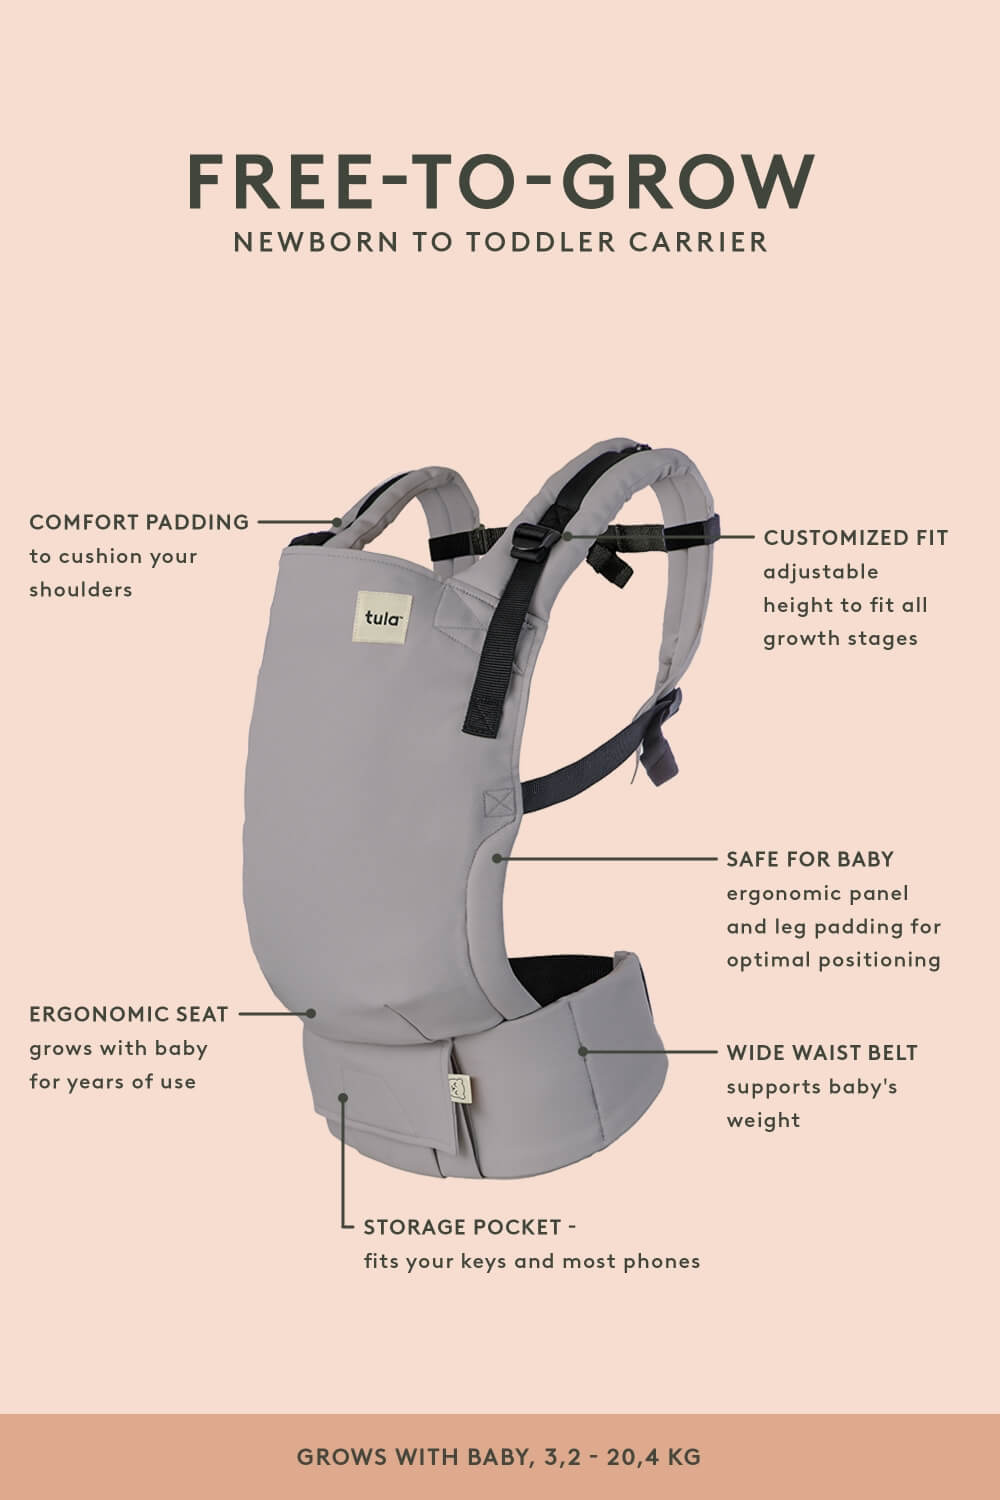 Anchors Away - Mesh Free-to-Grow Baby Carrier